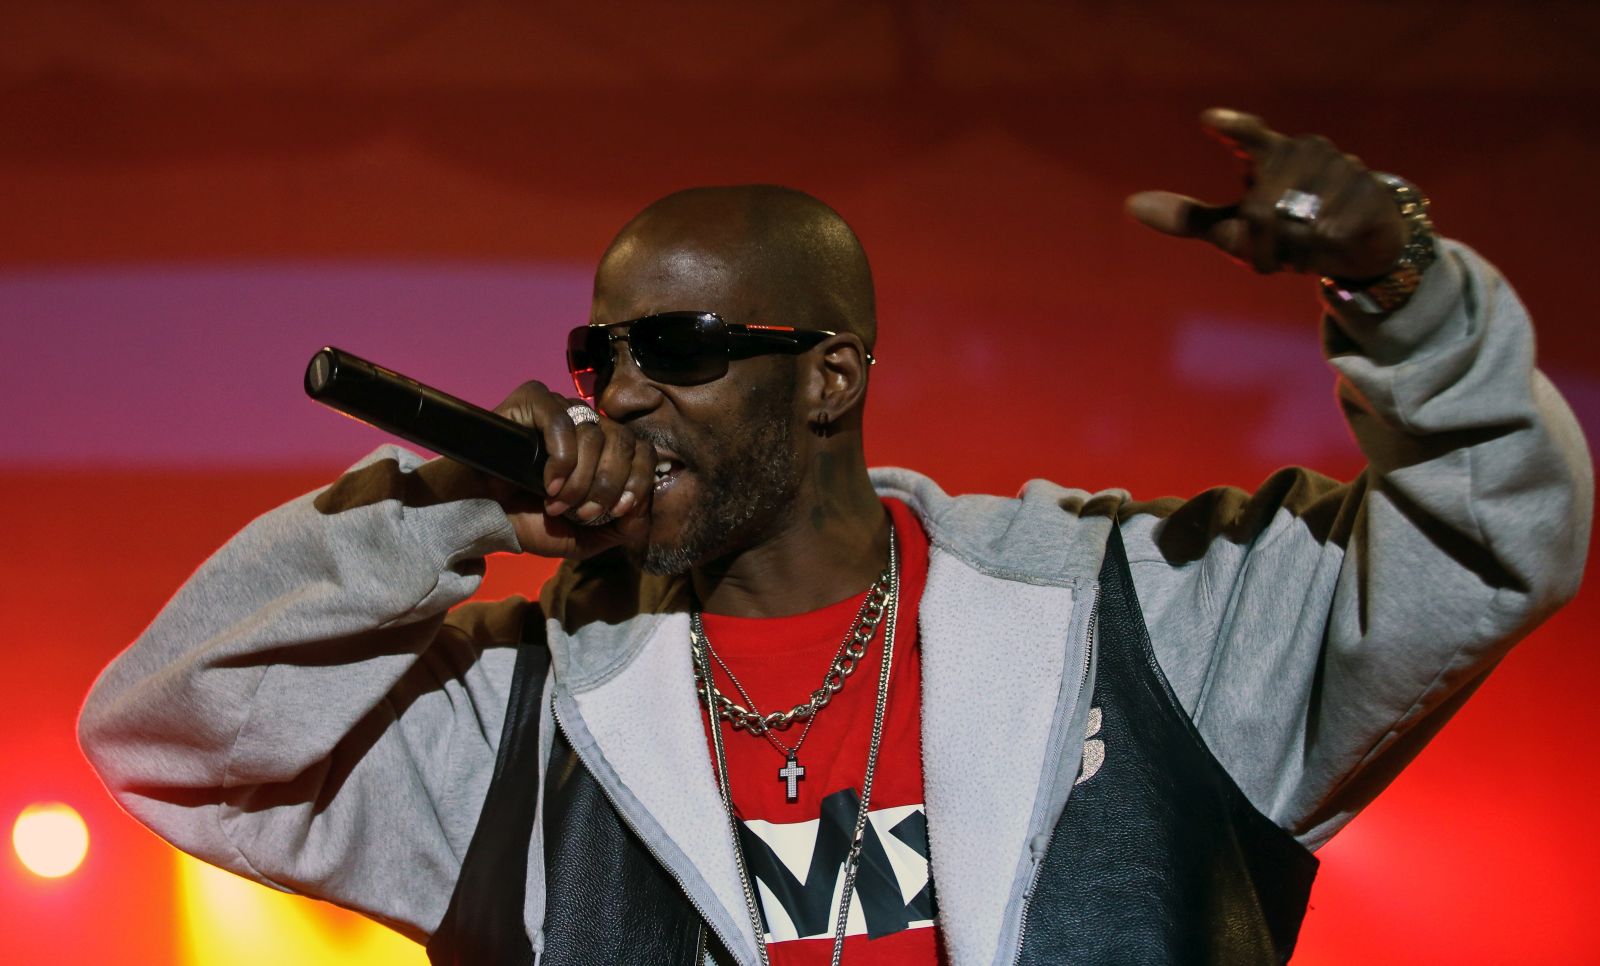 epa09114255 (FILE) - US rapper and actor DMX (Earl Simmons) performs on stage during his concert at Warsaw Challenge 2014 in Sowinski Park, Warsaw, Poland, 11 May 2014 (reissued 03 April 2021). According to media reports US rapper DMX was hospitalized late 02 April 2021 in a critical state.  EPA/RAFAL GUZ POLAND OUT *** Local Caption *** 51362124